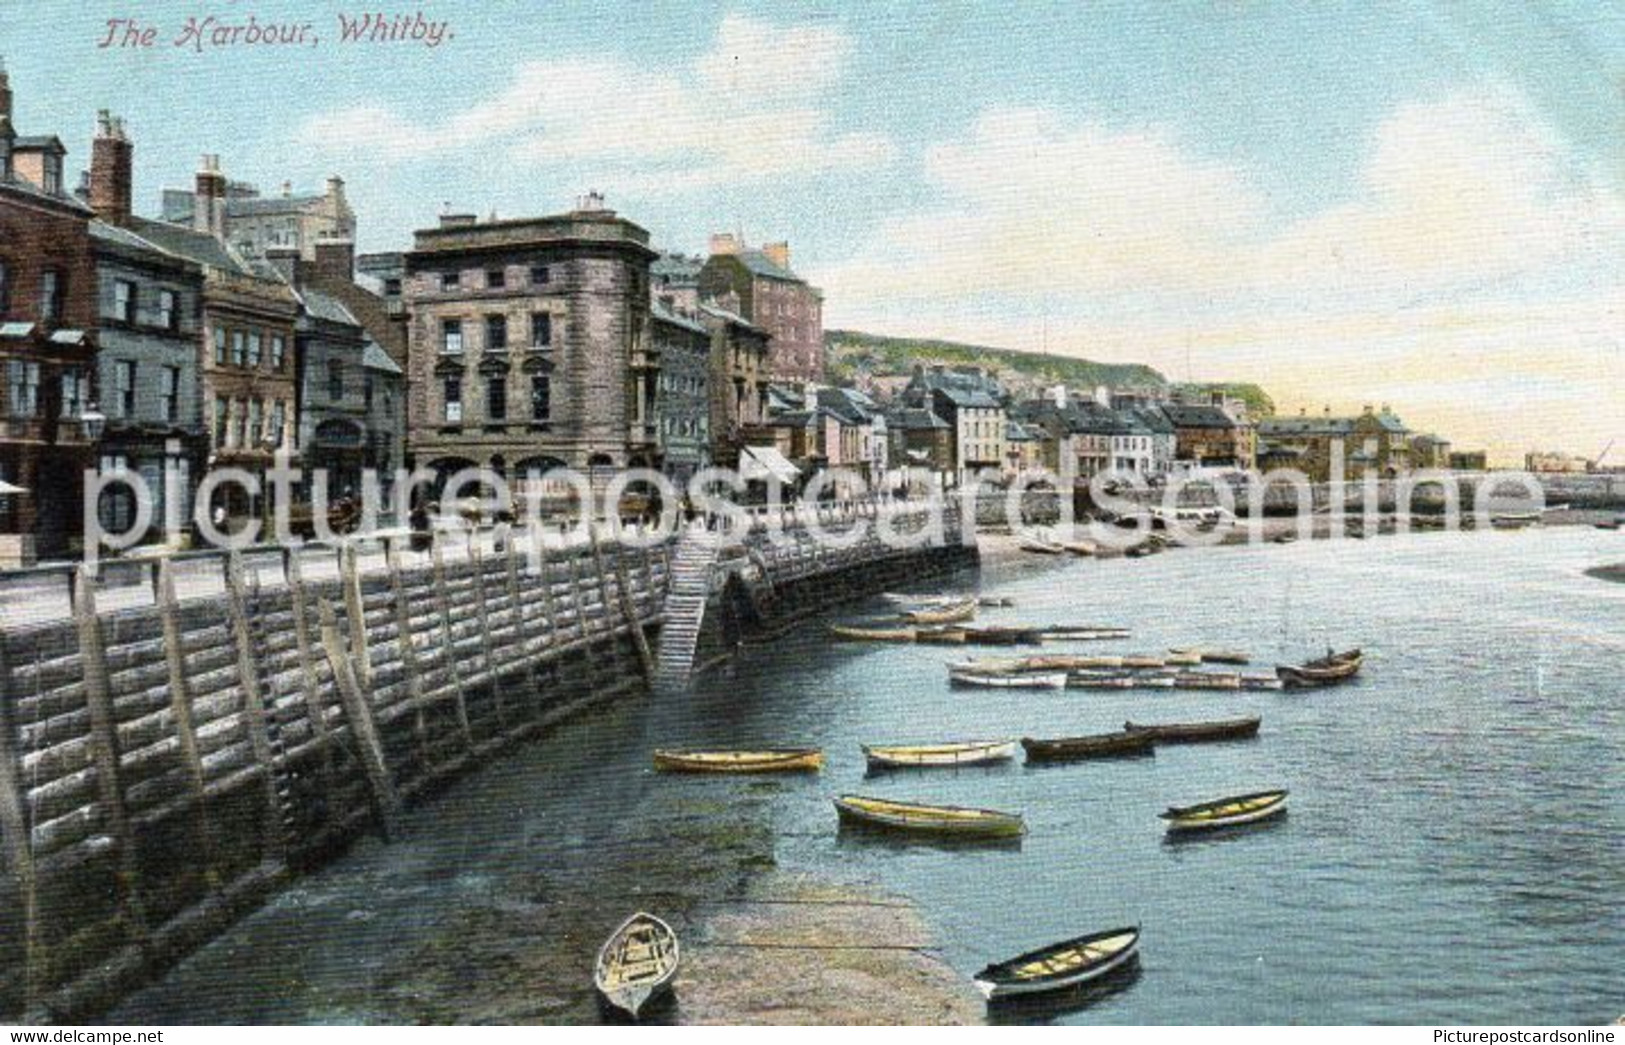 WHITBY THE HARBOUR OLD COLOUR POSTCARD YORKSHIRE - Whitby